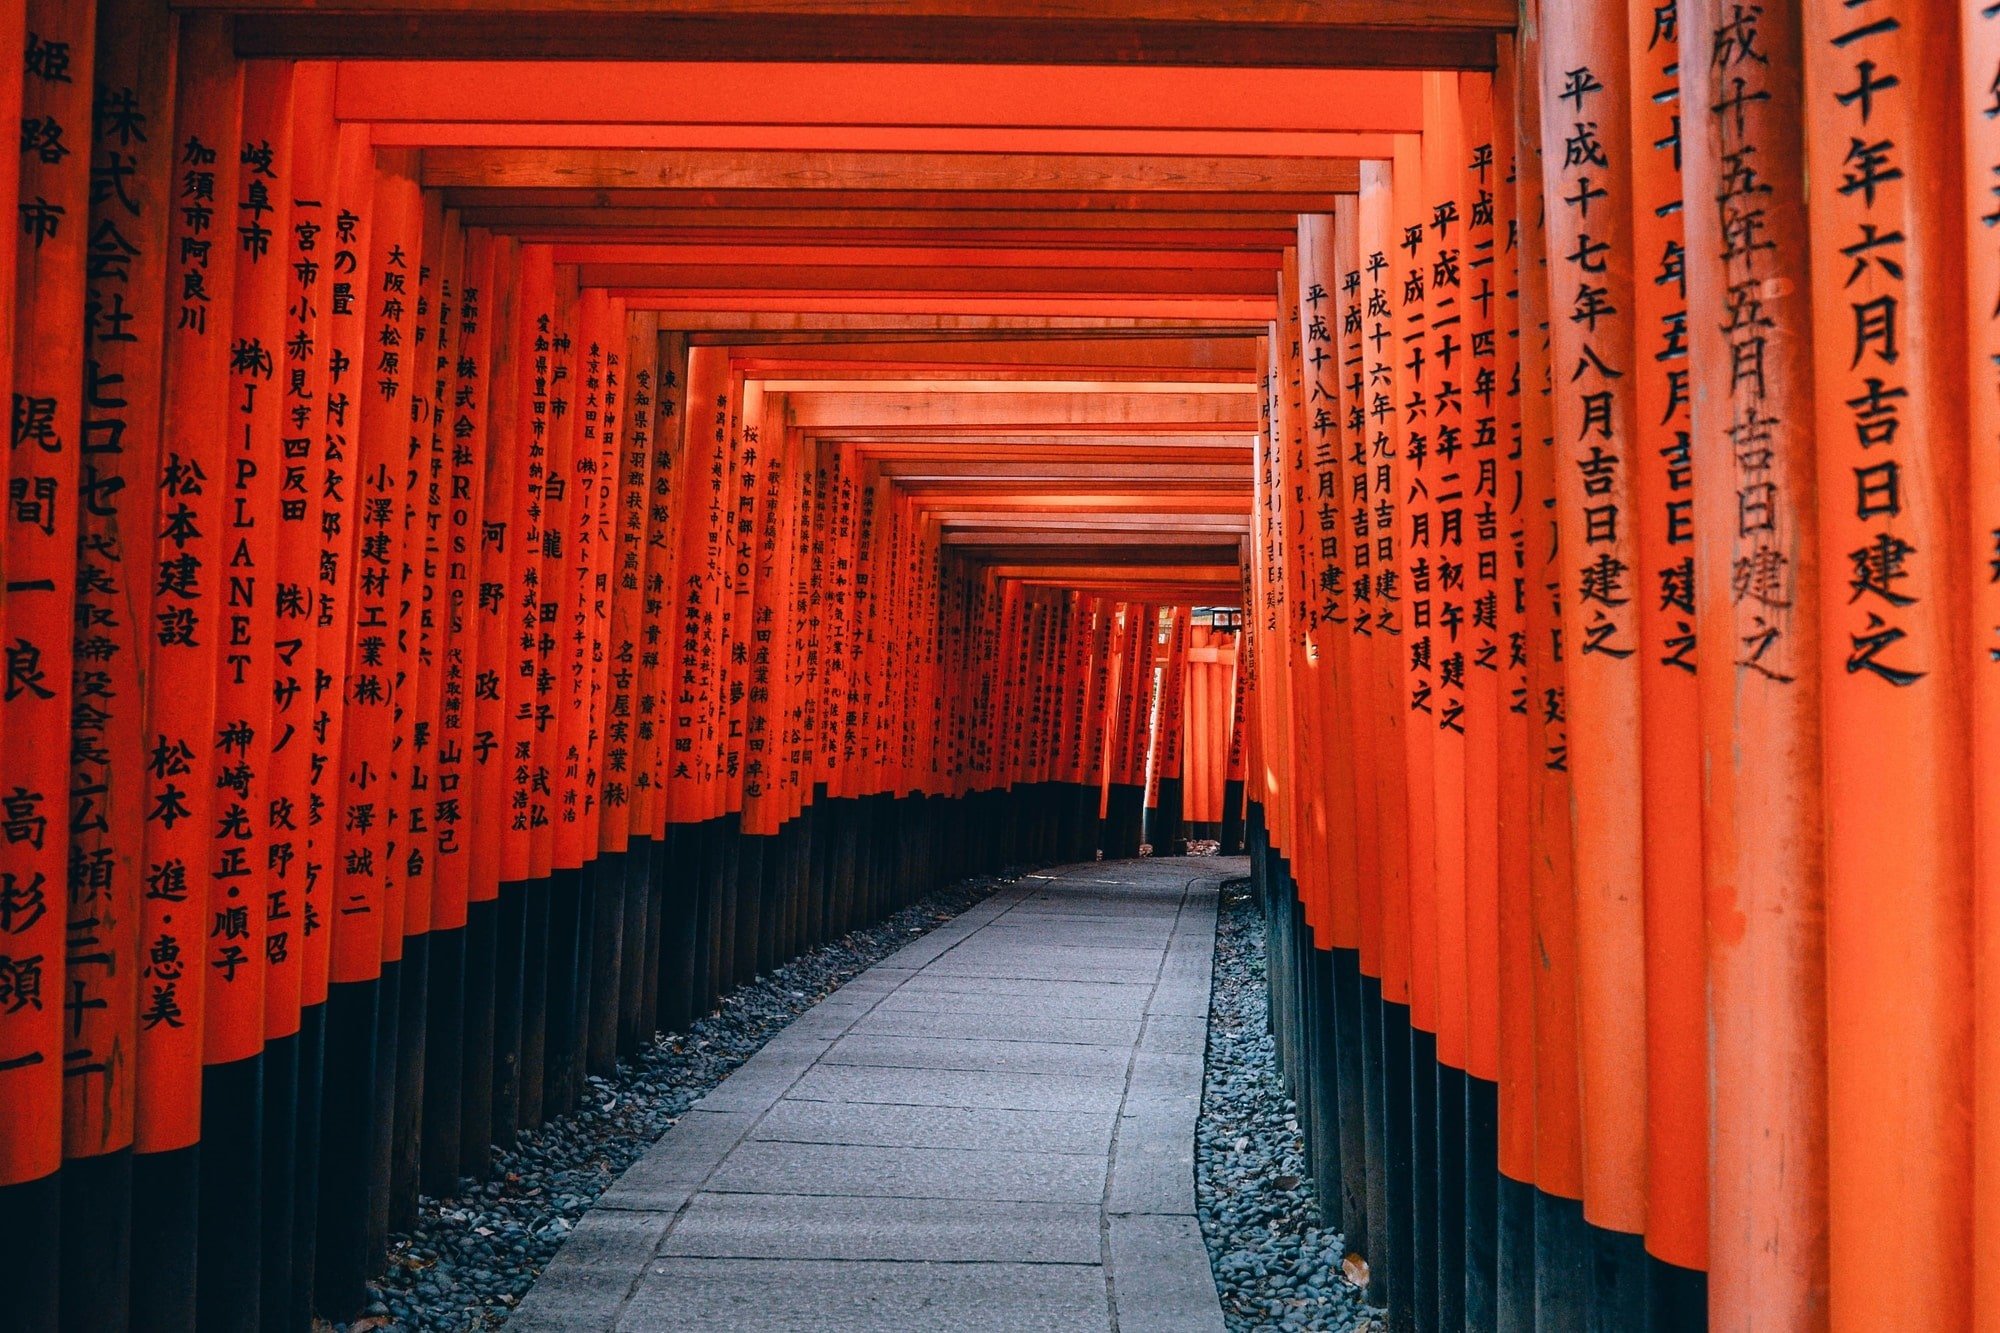 The astonishing number of temples, shrines, and palaces that adorn the city make Kyoto's architecture its most famous feature worldwide